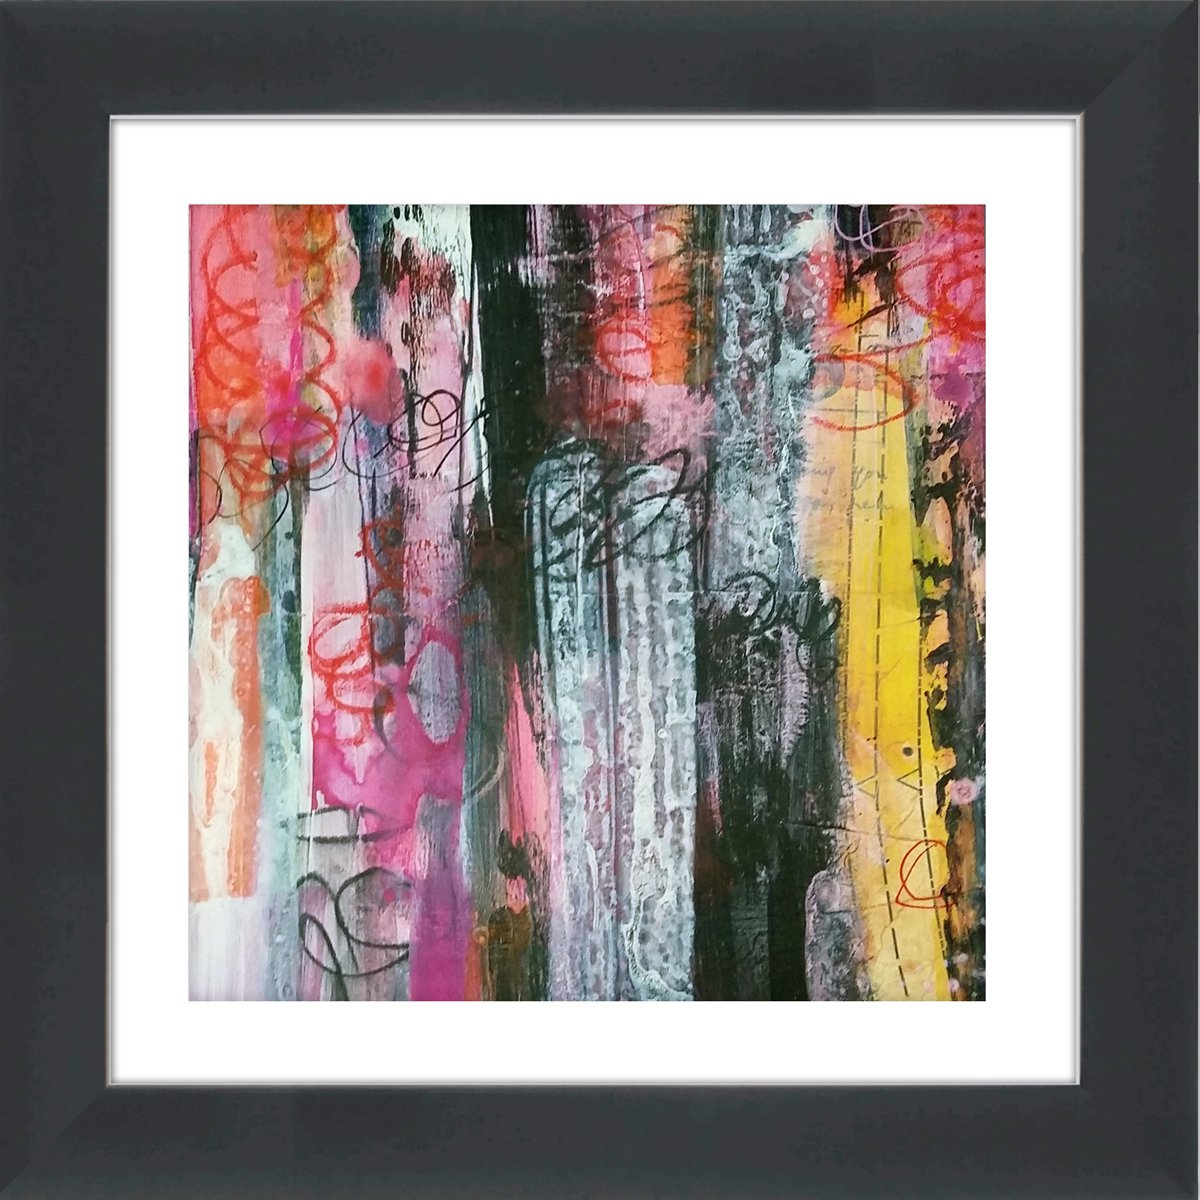 Abstraction #21 - Framed and ready to hang - original abstract painting by Carolynne Coulson